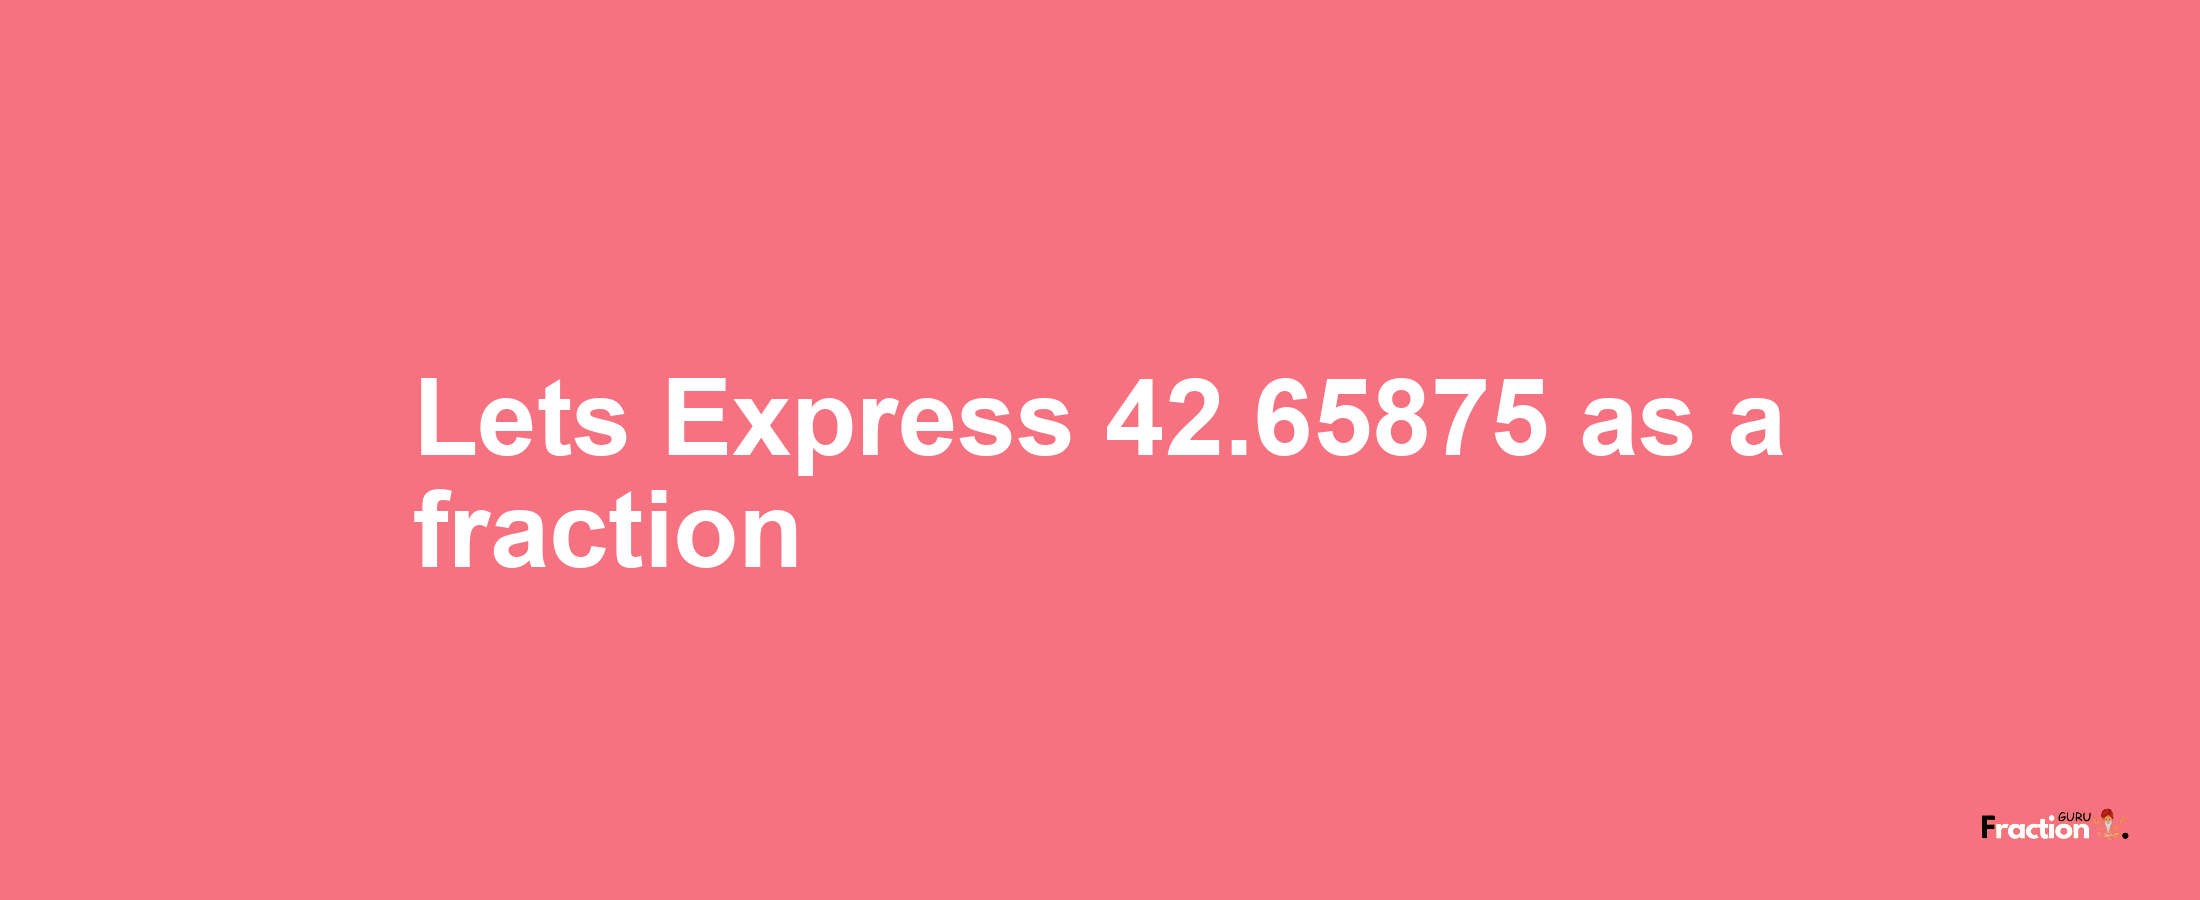 Lets Express 42.65875 as afraction